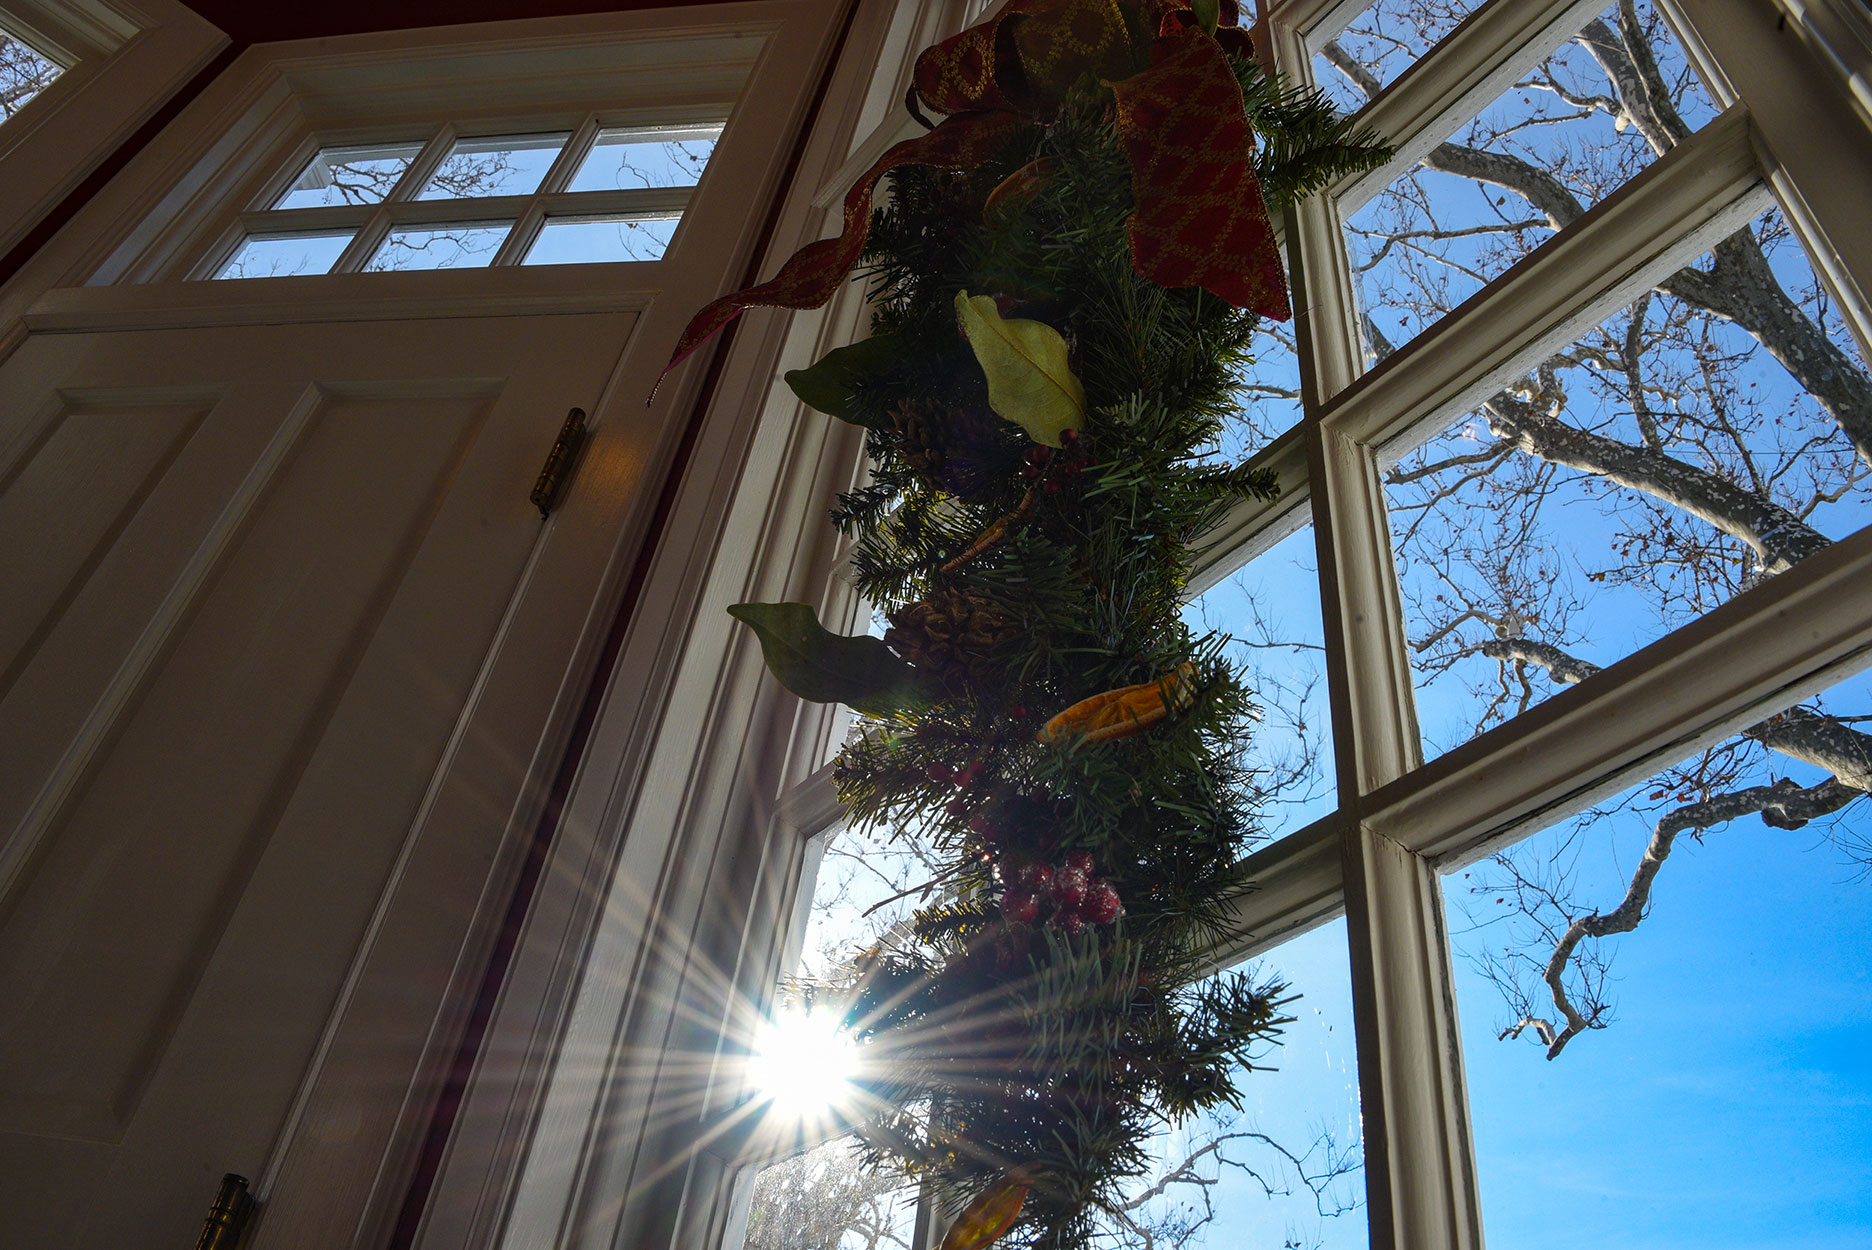 A view of a vestibule window just outside the Governors Study. A natural arrangement hanging in the window, sunlight streaming through